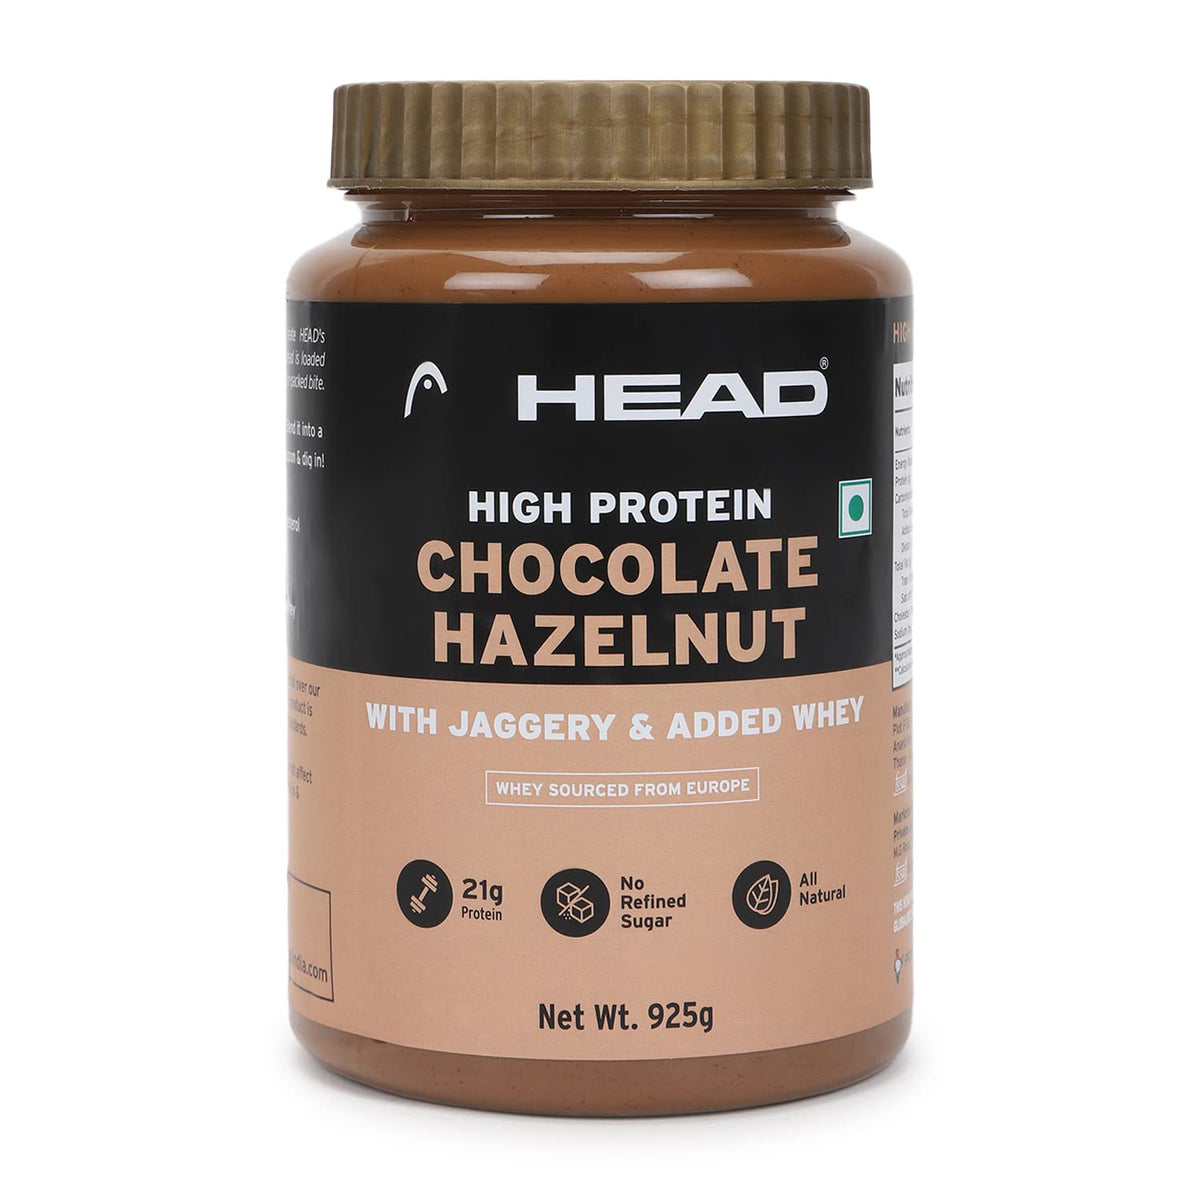 Head High Protein Nutbutter (925g, Chocolate Hazelnut Spread) | 100% Pure Nuts | Added Whey and Jaggery | Protein & Fiber Rich Nutritious Snack